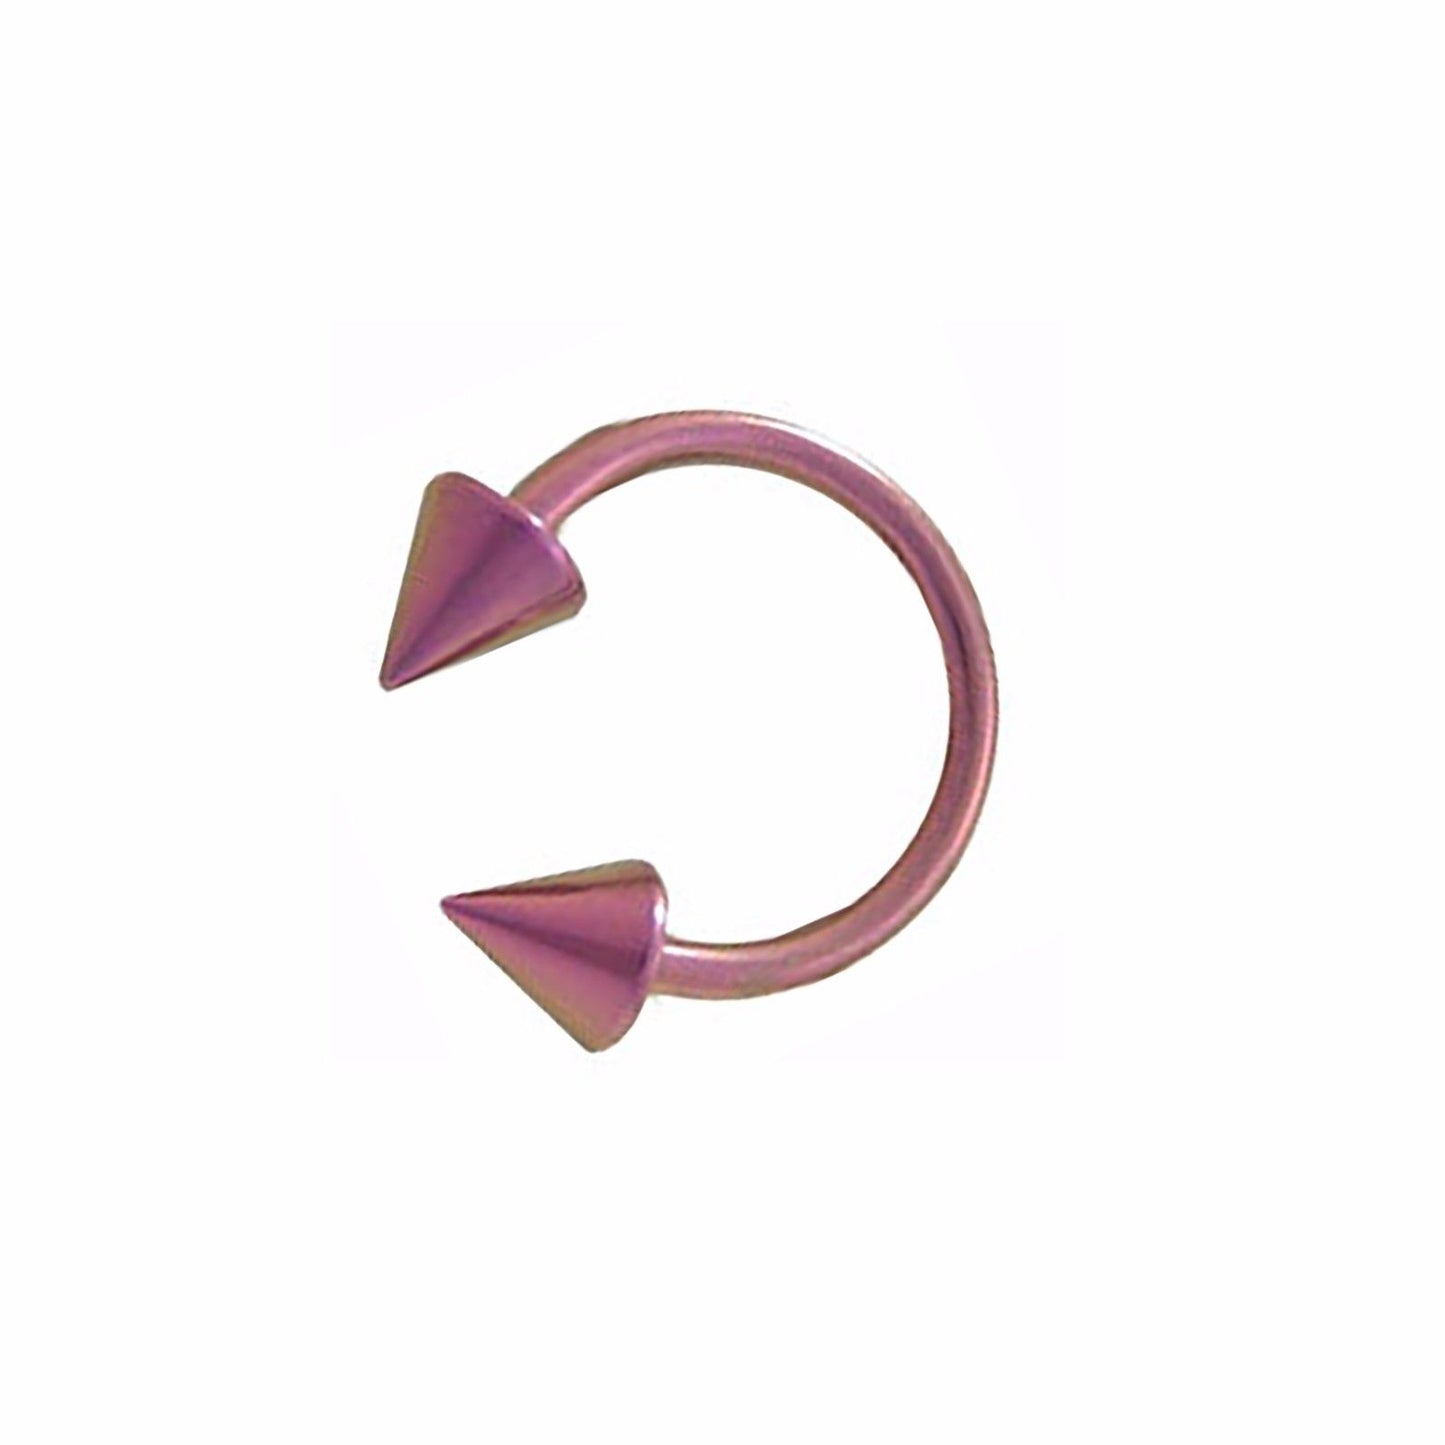 Pink 14G Titanium Horseshoe Ring with Spike Ends